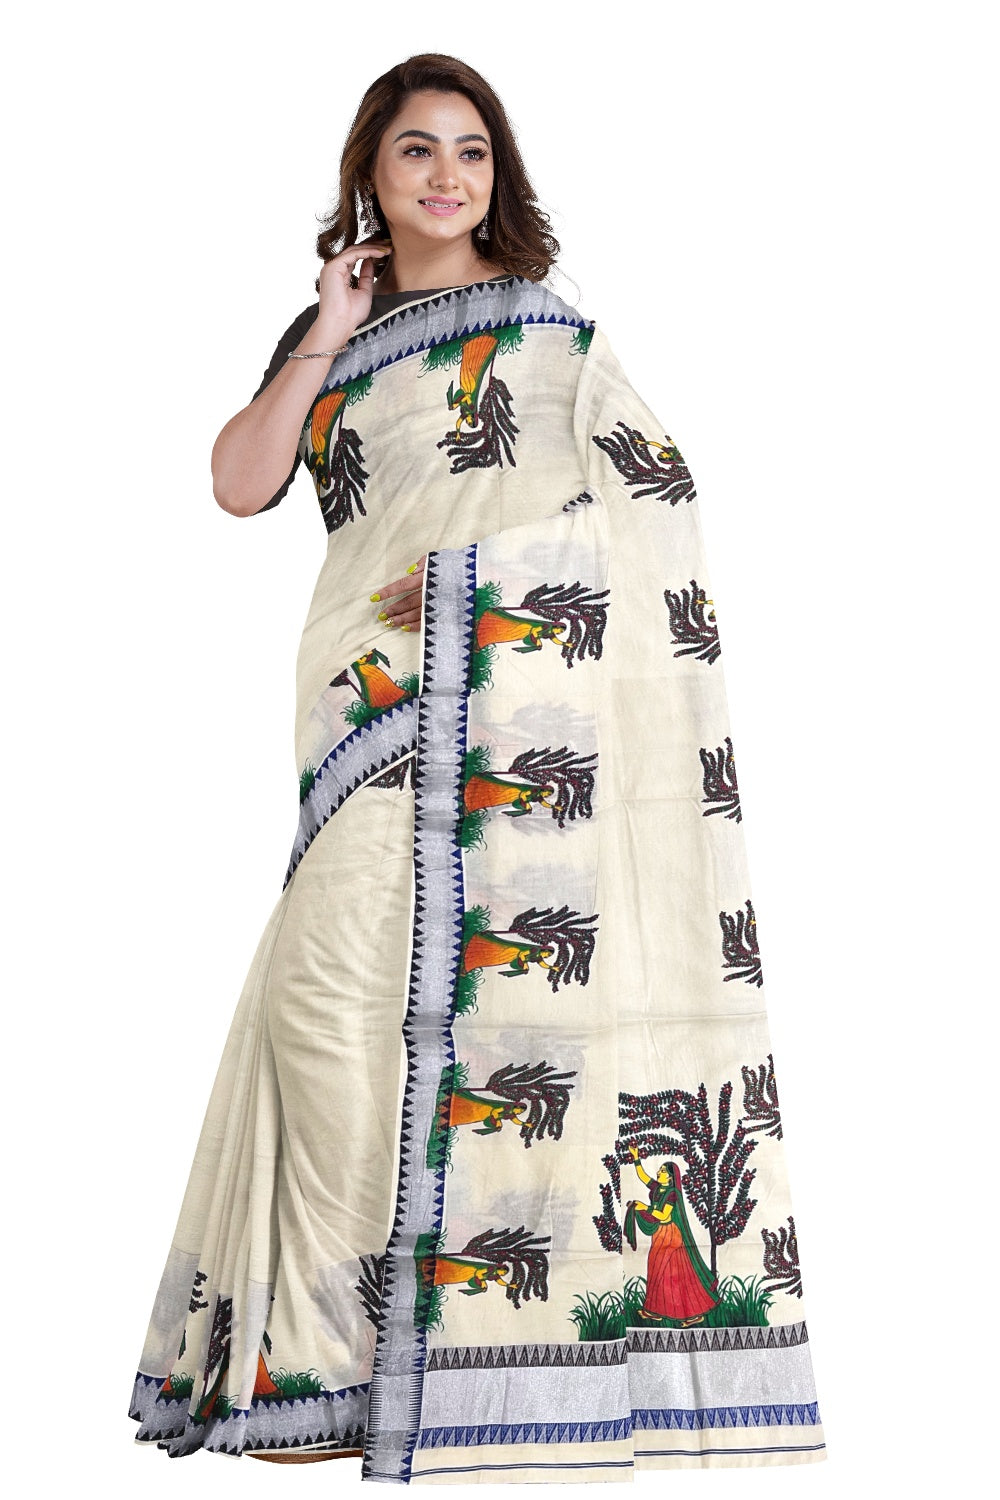 Kerala Pure Cotton Saree with Mural Printed Gardenerette Design and Blue Brown Temple Border